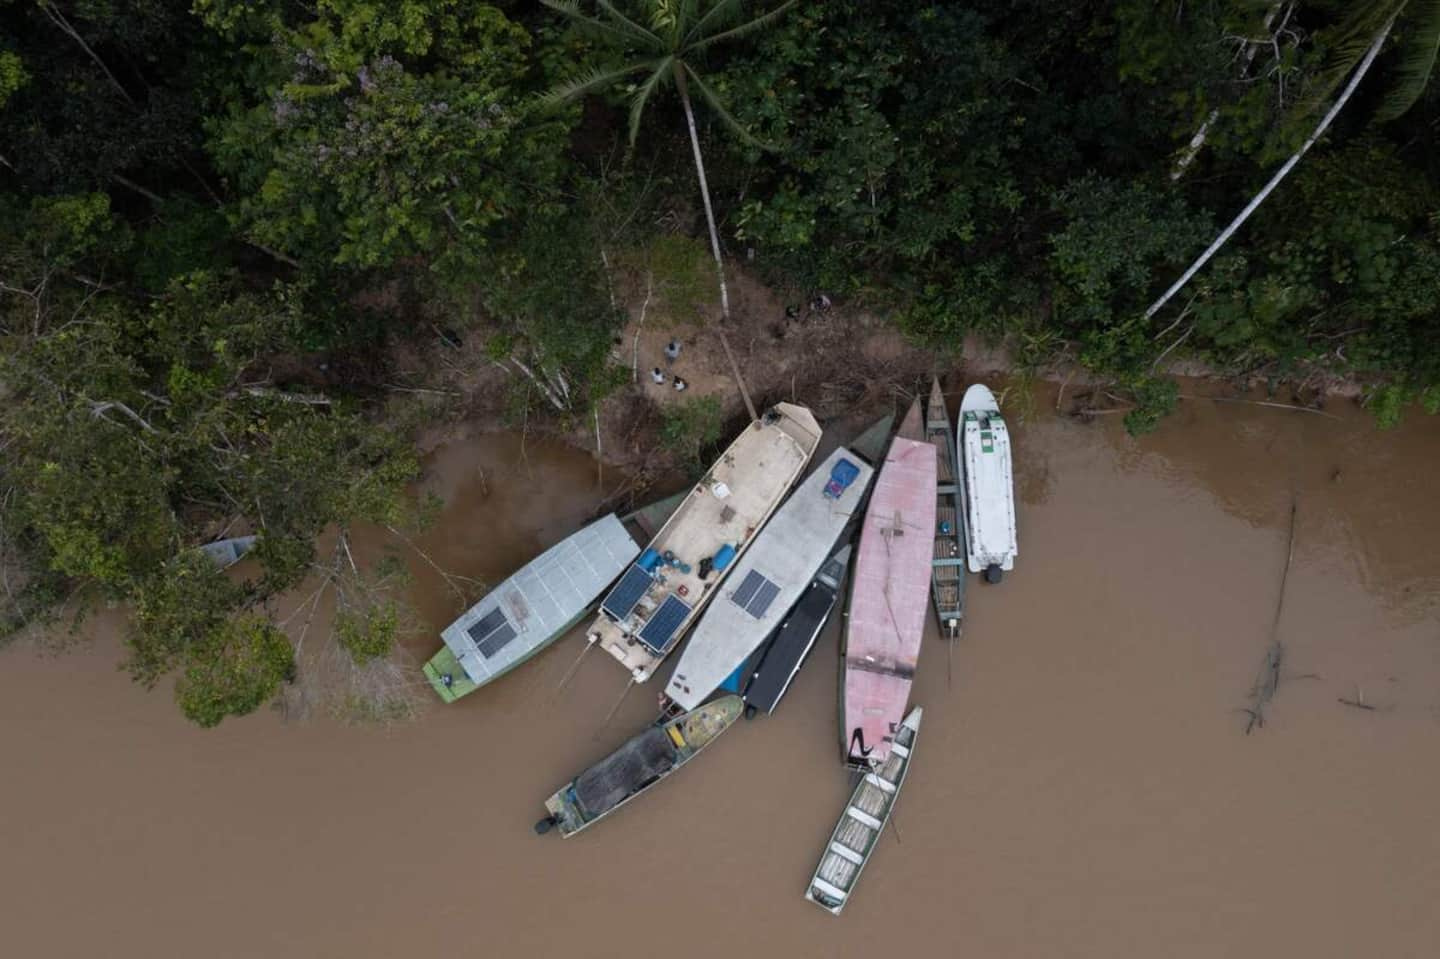 Disappearance of two men in the Amazon: what we know